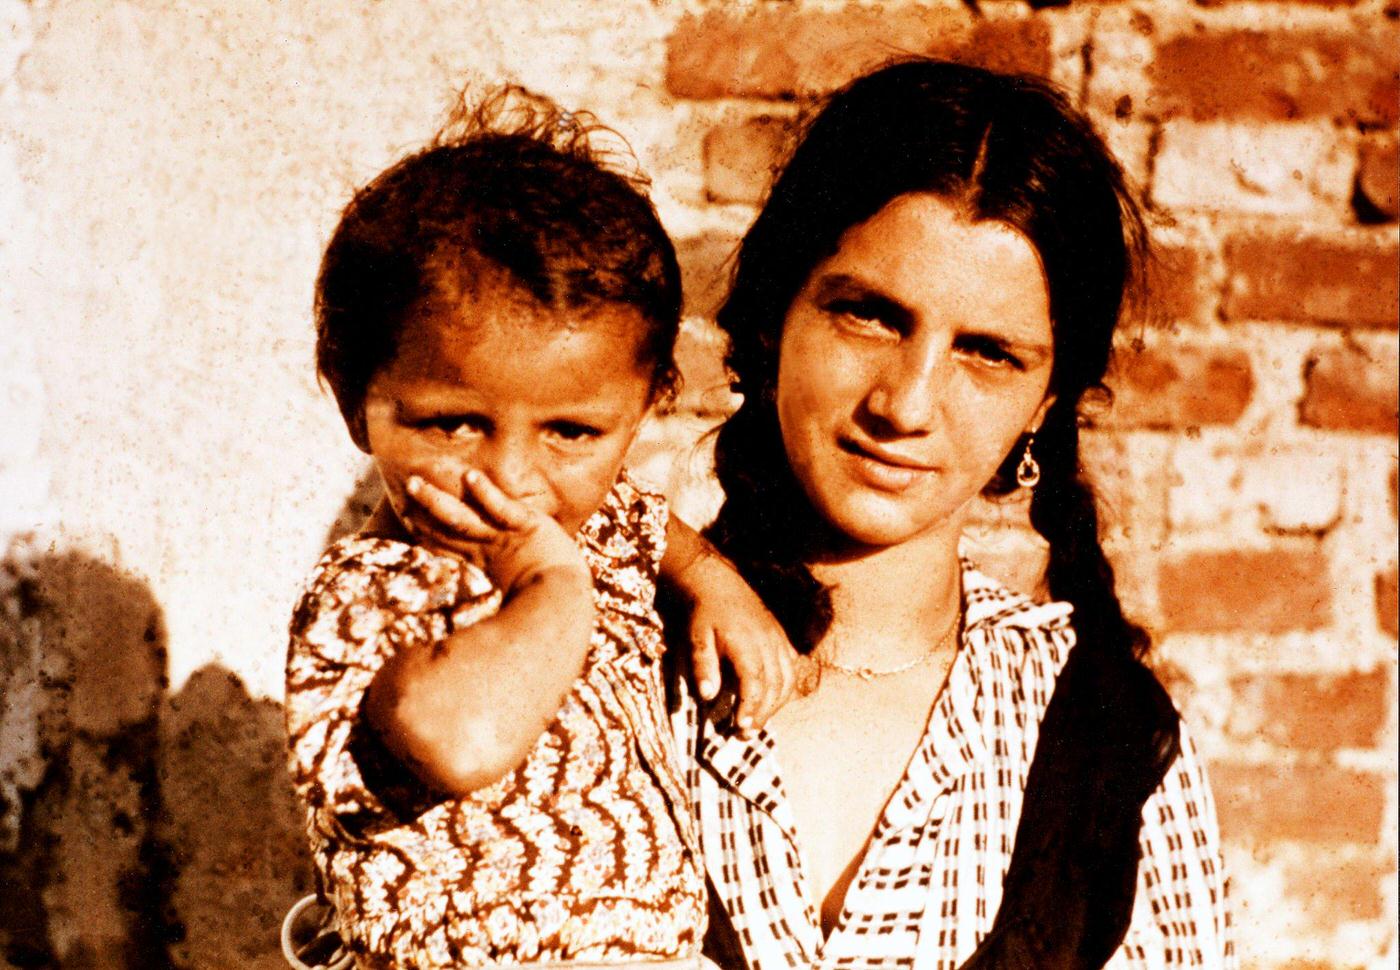 Gypsy (Sinti and Roma) deportation, a young woman with a child in a camp during an investigation conducted by the Racial Hygiene Research Center in 1938.